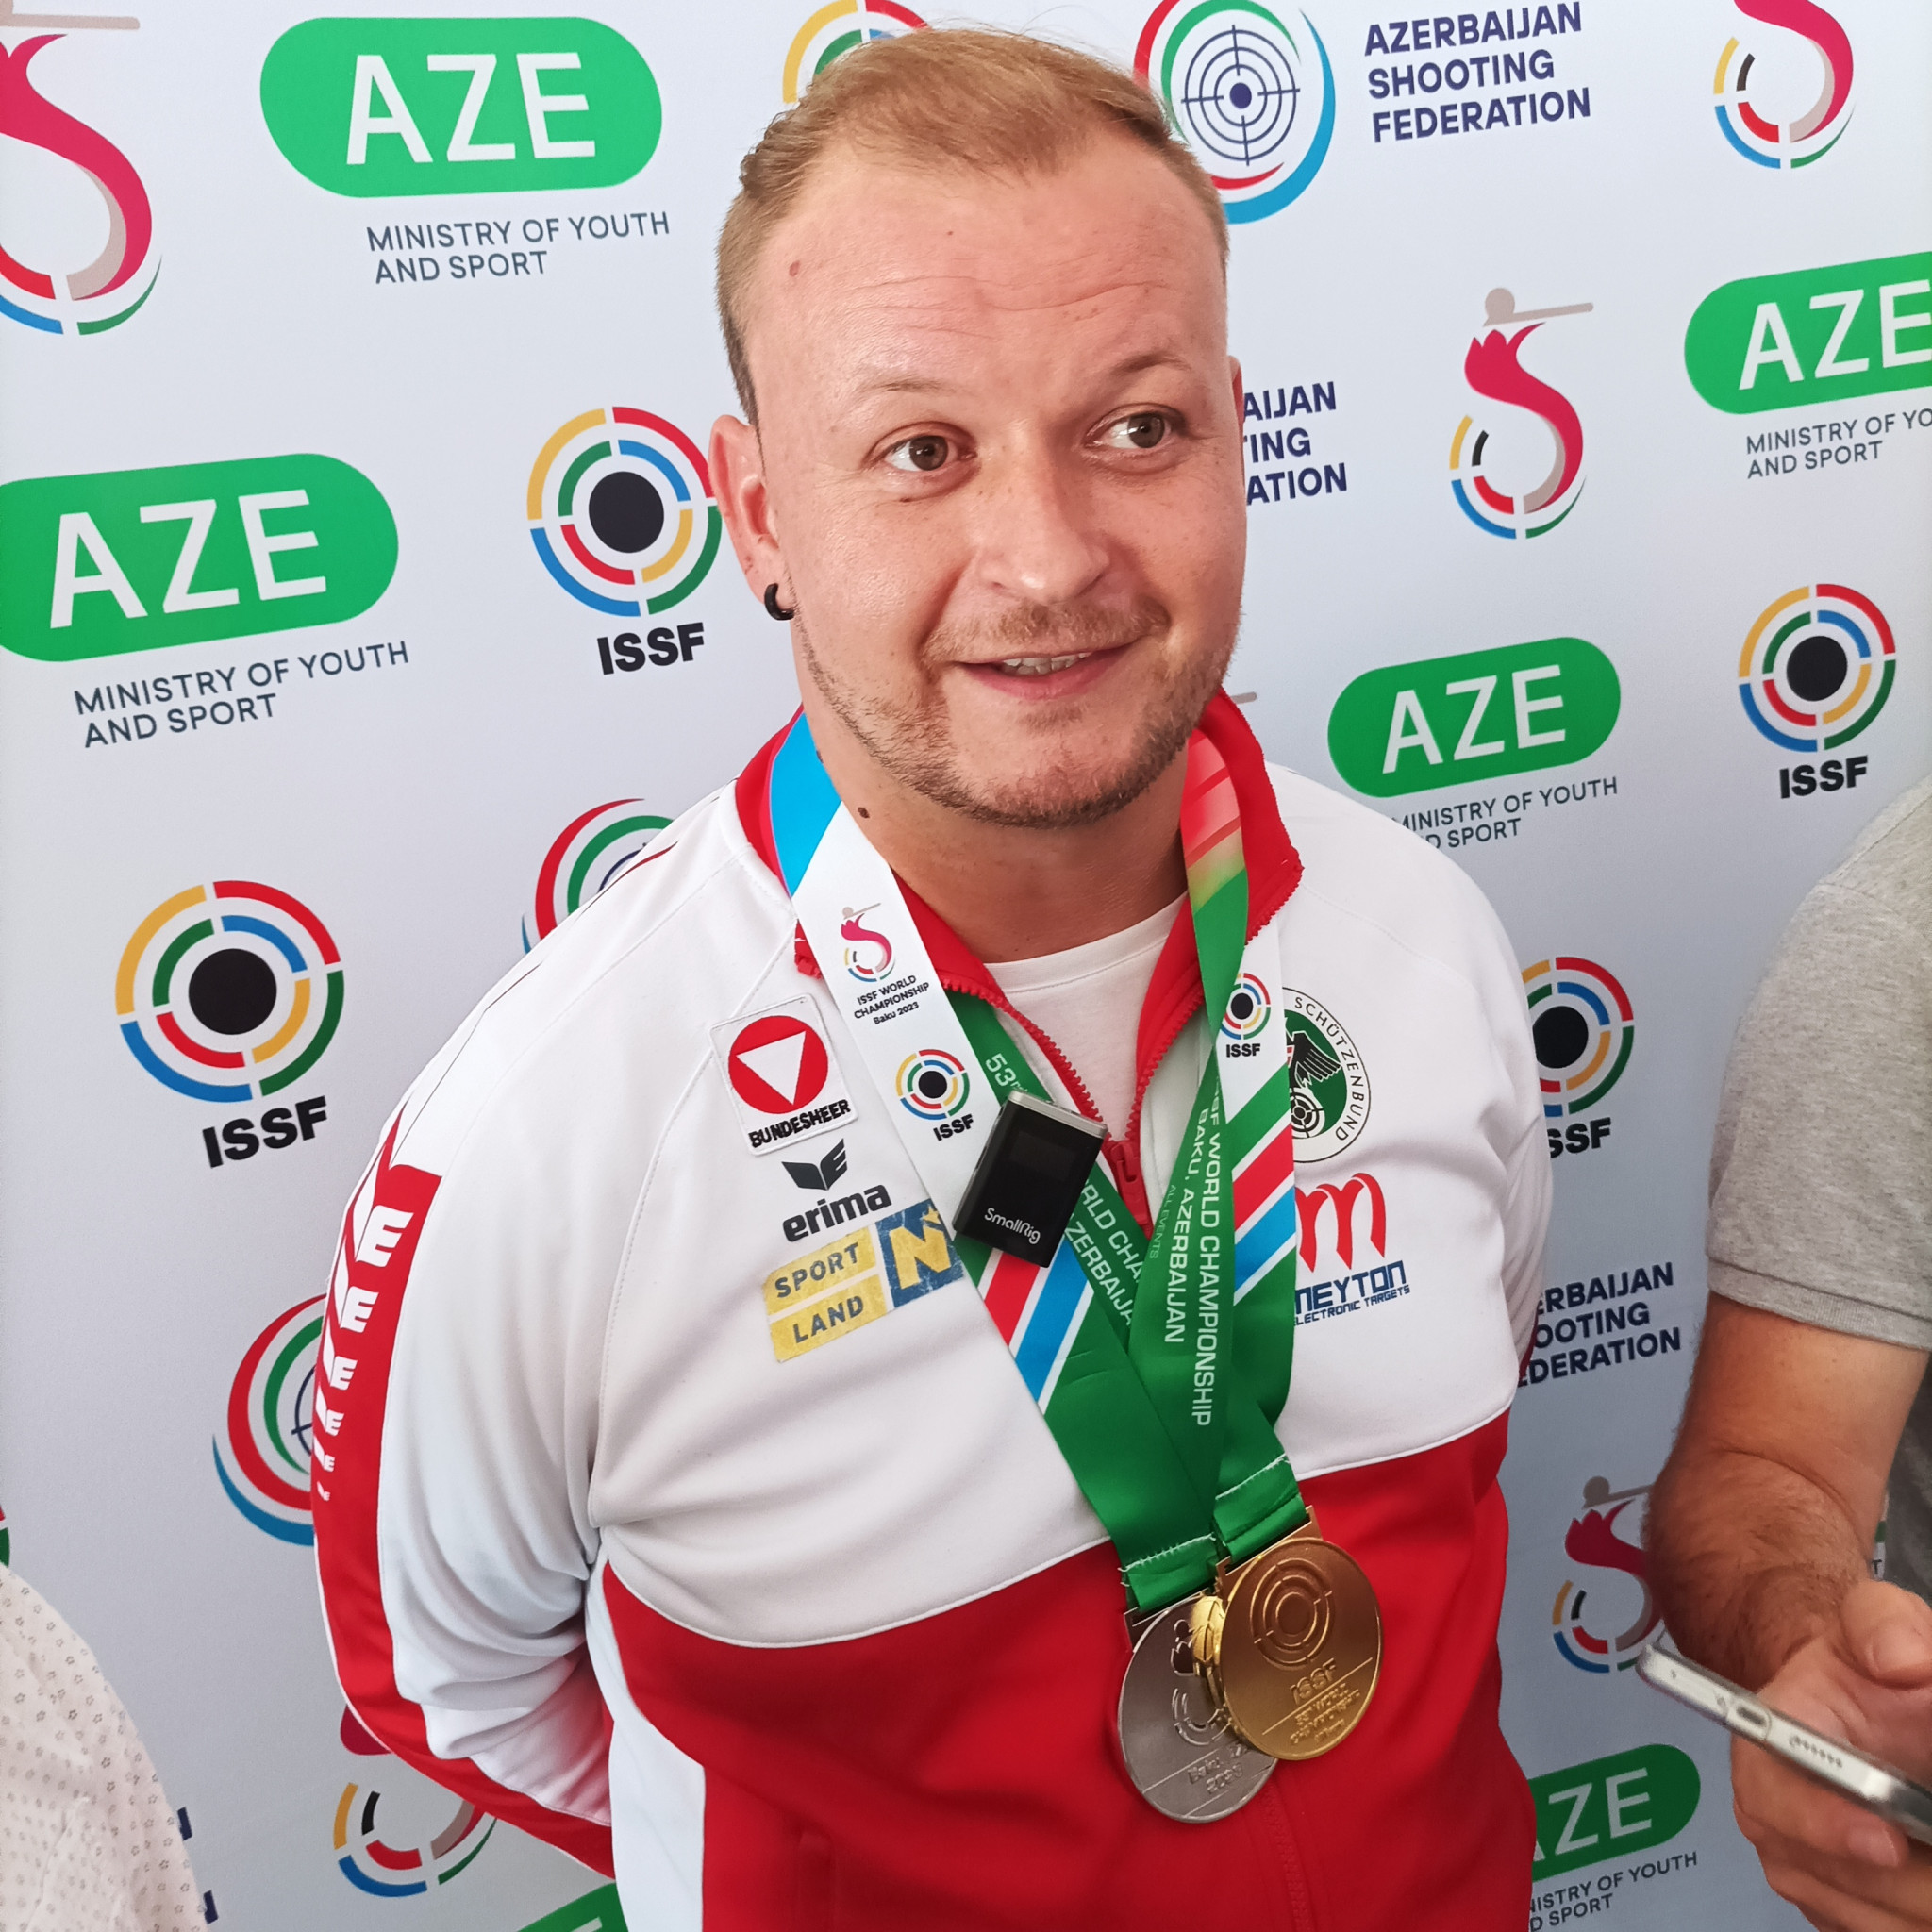 Alexander Schmirl of Austria after winning gold in men's three position rifle shooting at the ISSF World Championships in Baku ©ITG